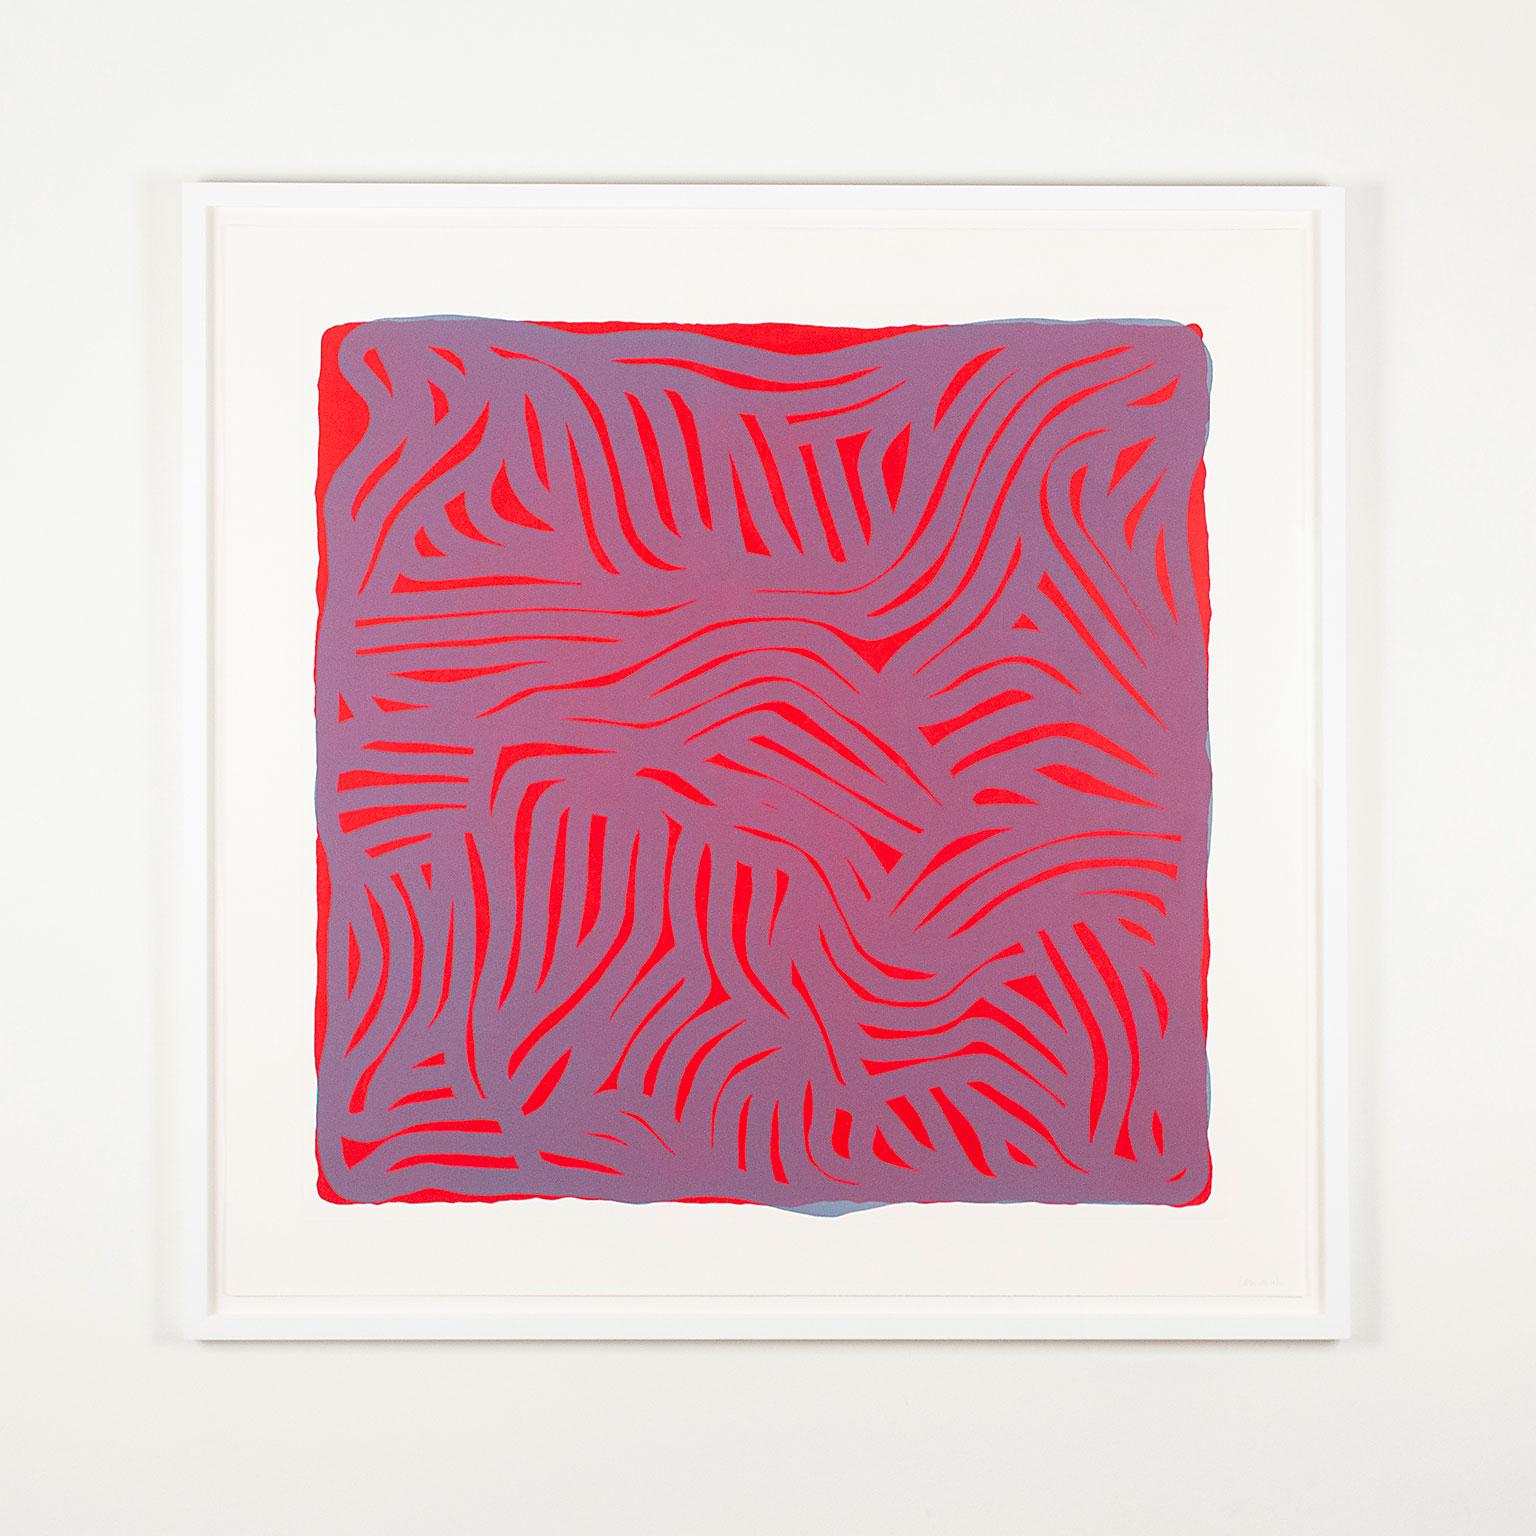 Abstract Print Sol LeWitt - Courbes Paralleles